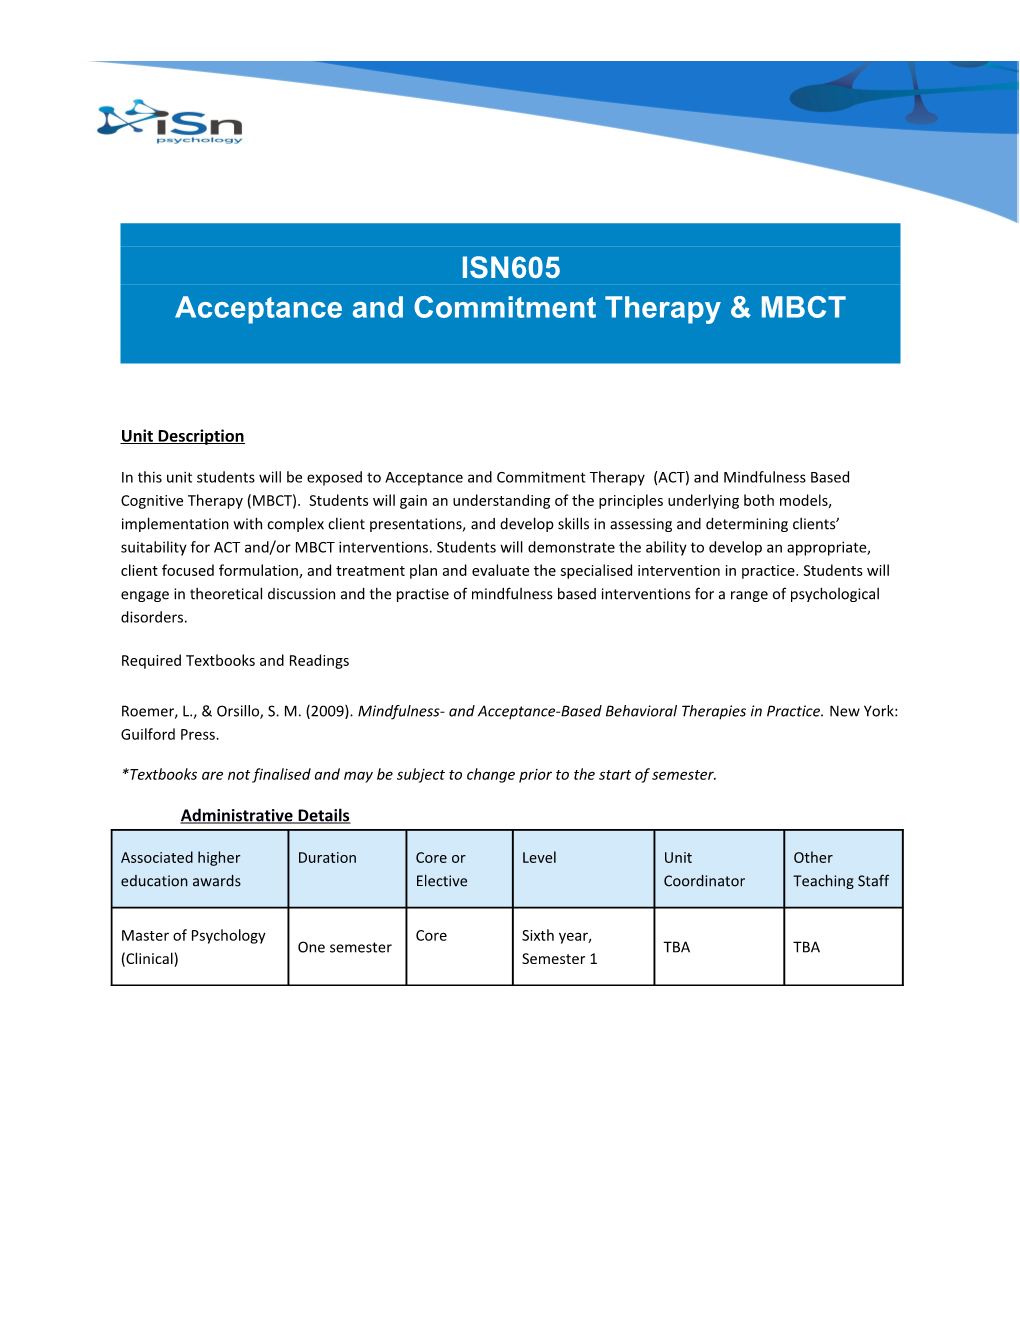 Acceptance and Commitment Therapy MBCT